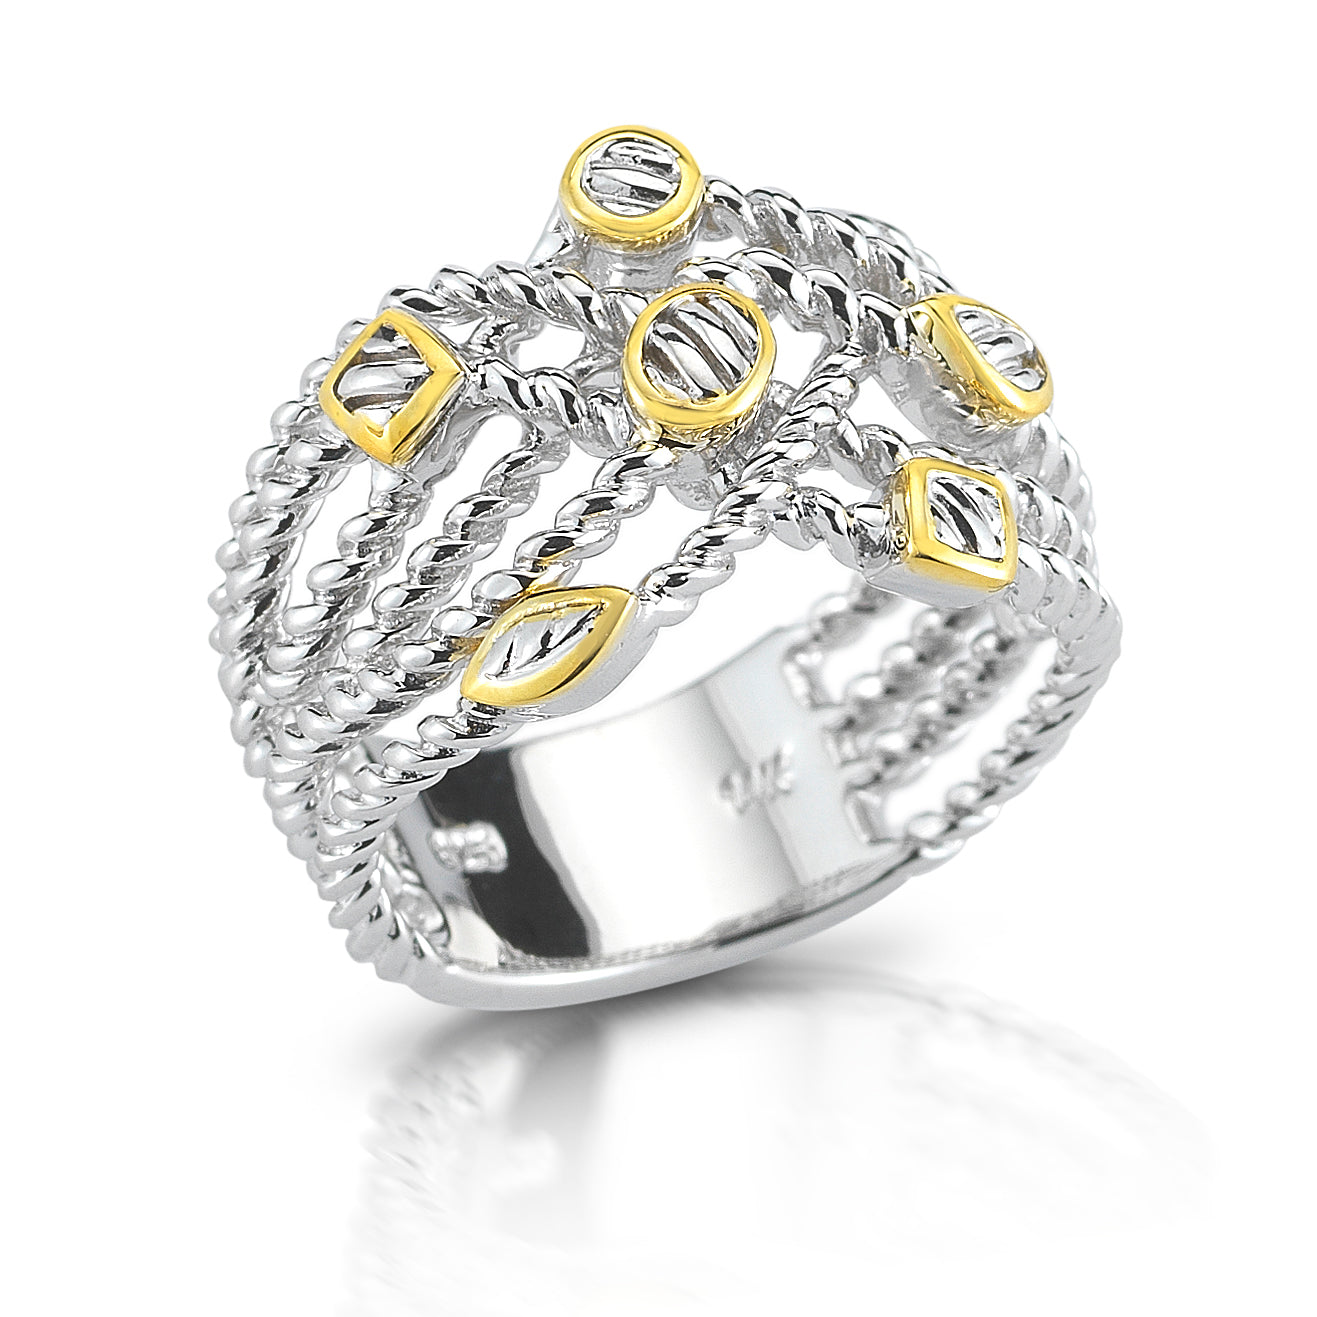 STERLING SILVER  CABLE DESIGN RING WITH 14K BEZZELS.